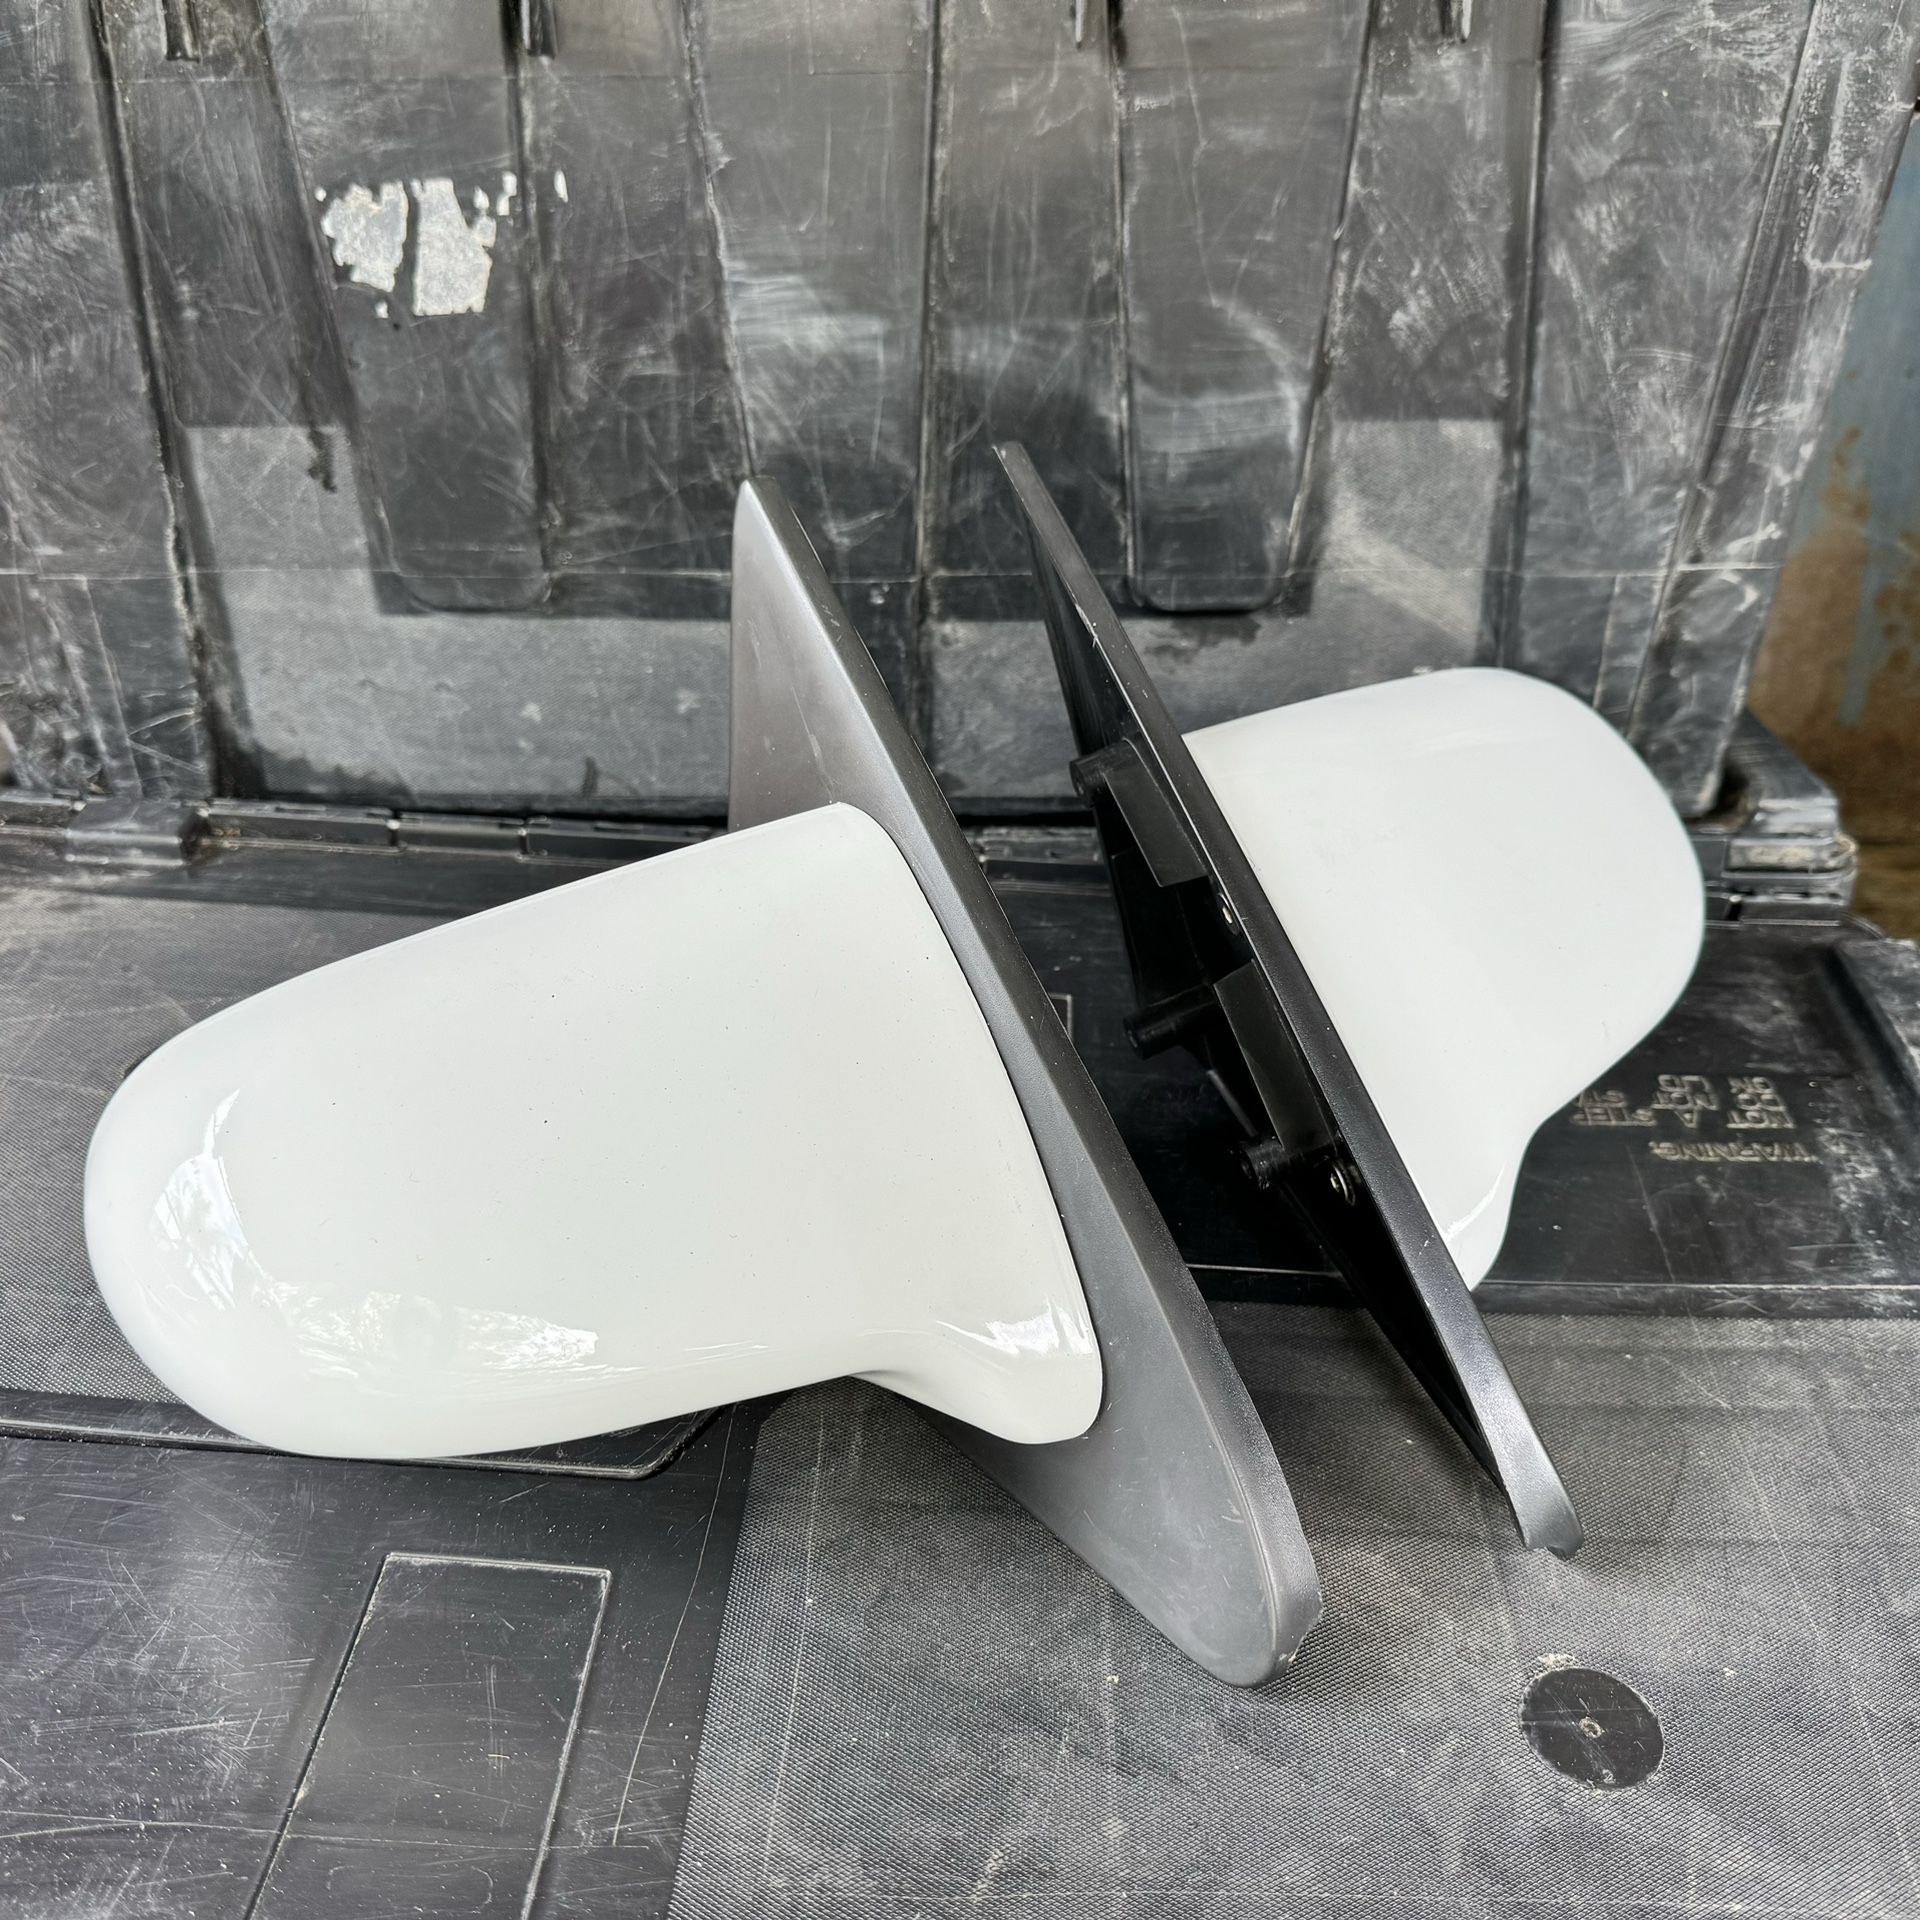 Spoon Style mirrors Frost White EG Coupe Hatchback